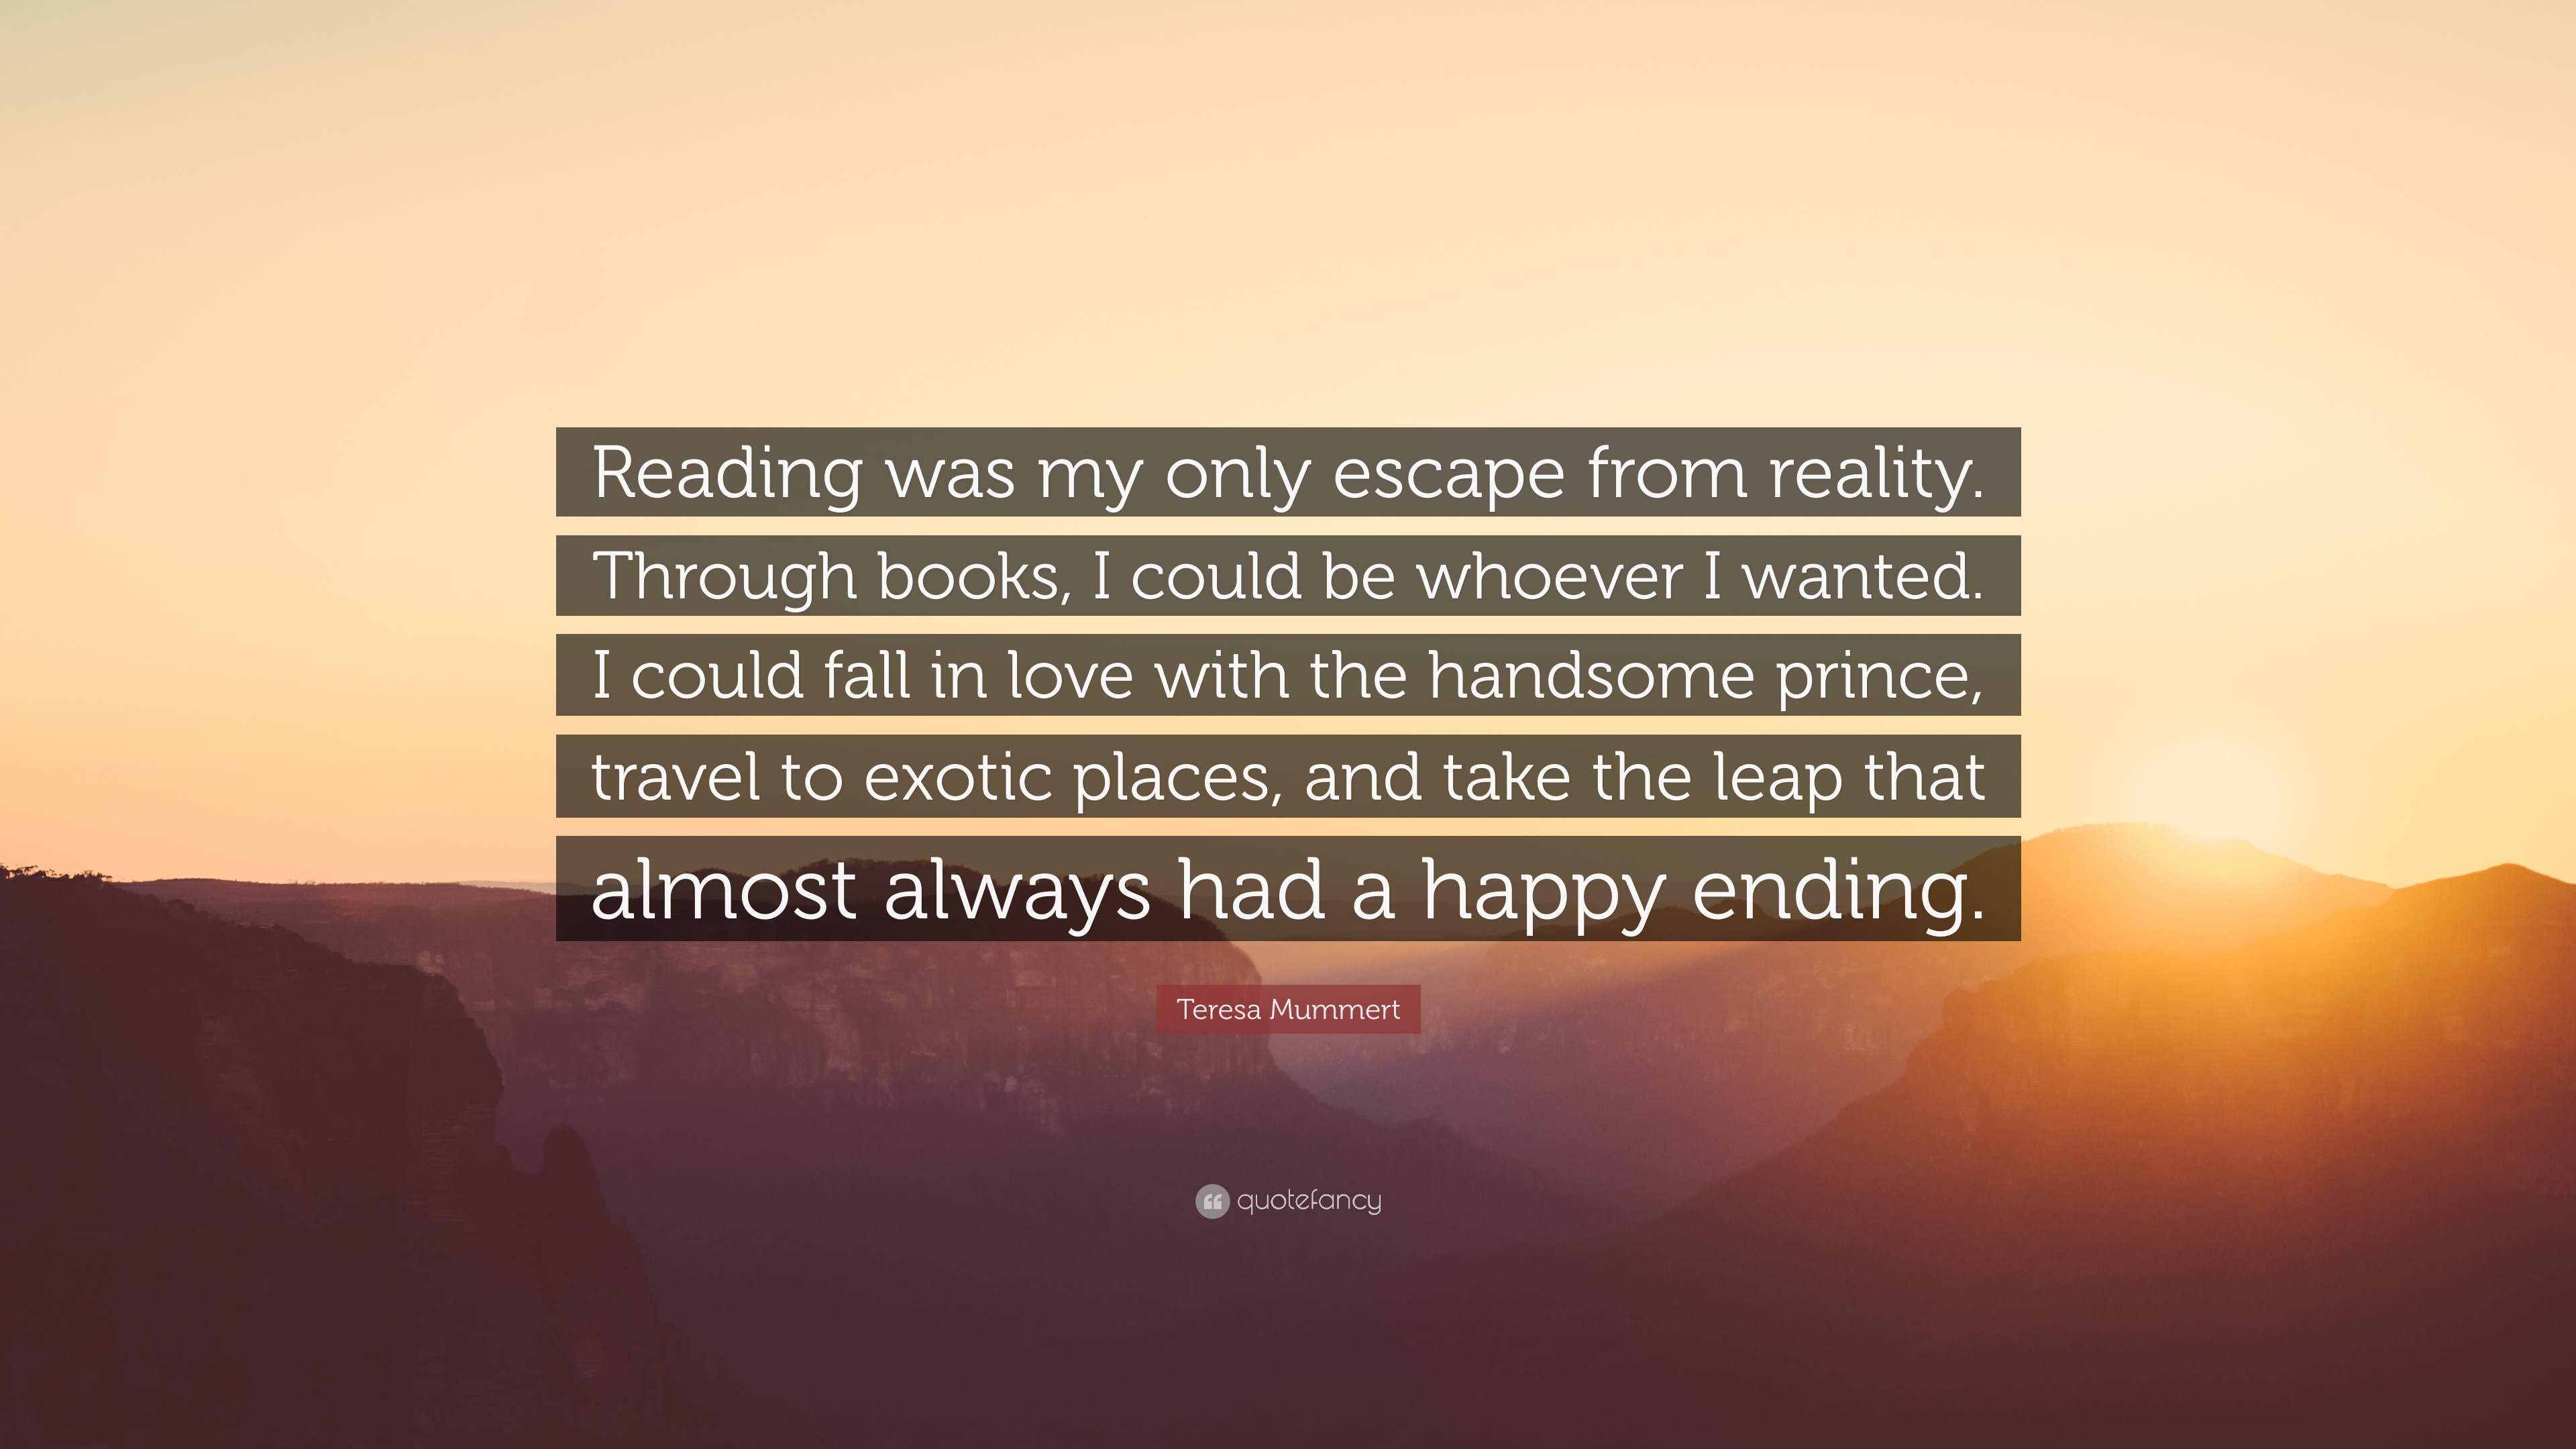 Teresa Mummert Quote “Reading was my only escape from reality Through books